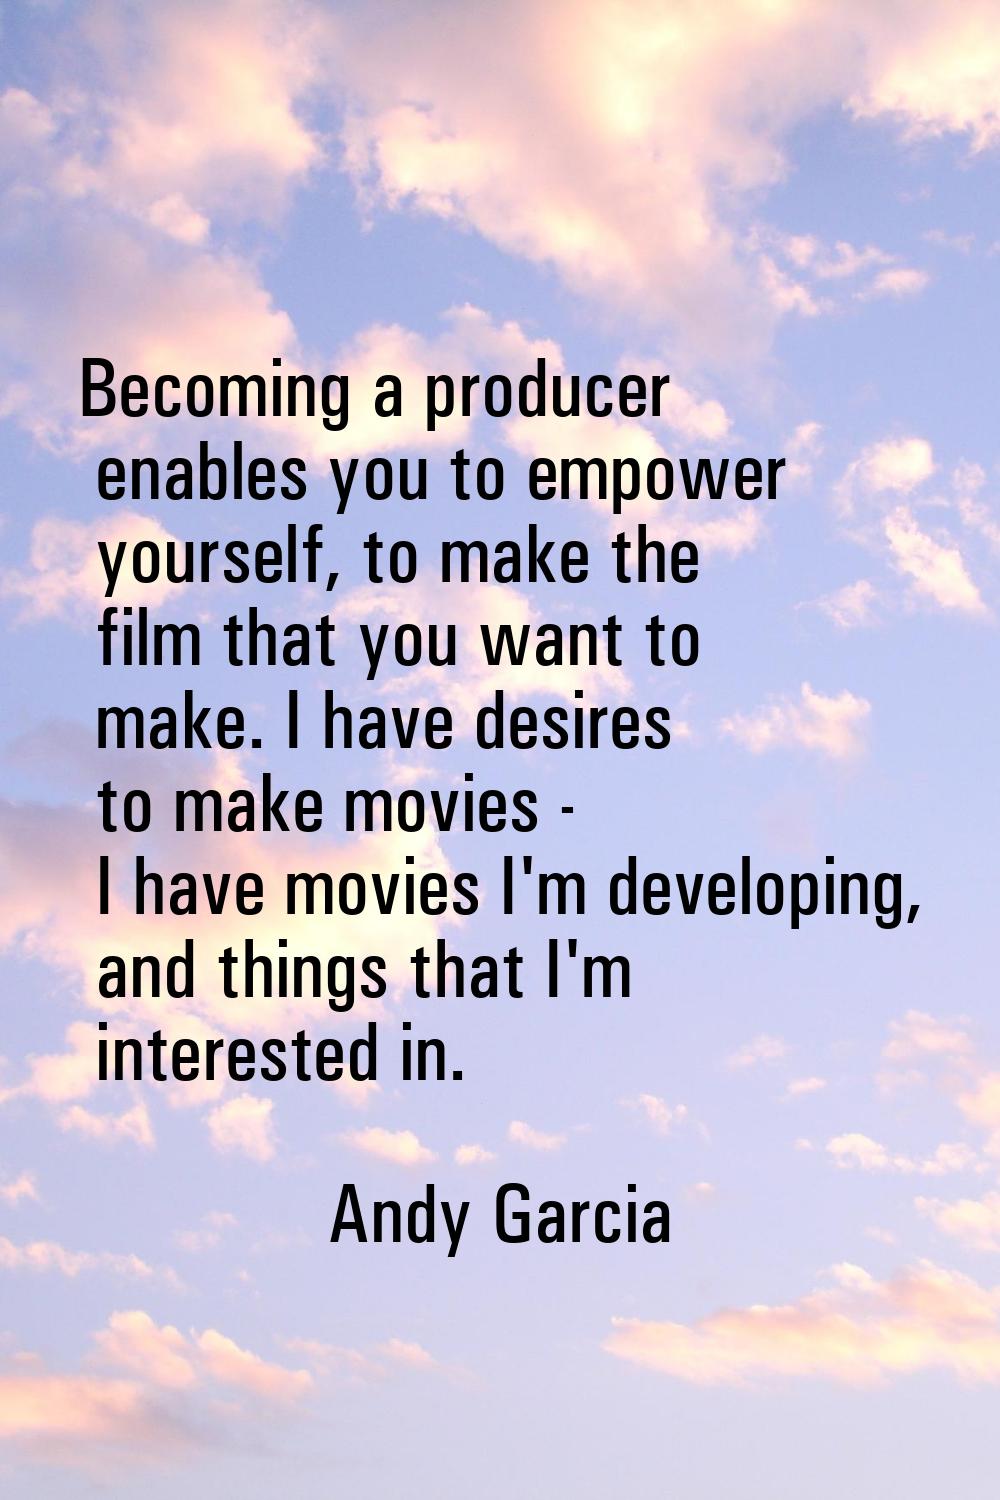 Becoming a producer enables you to empower yourself, to make the film that you want to make. I have